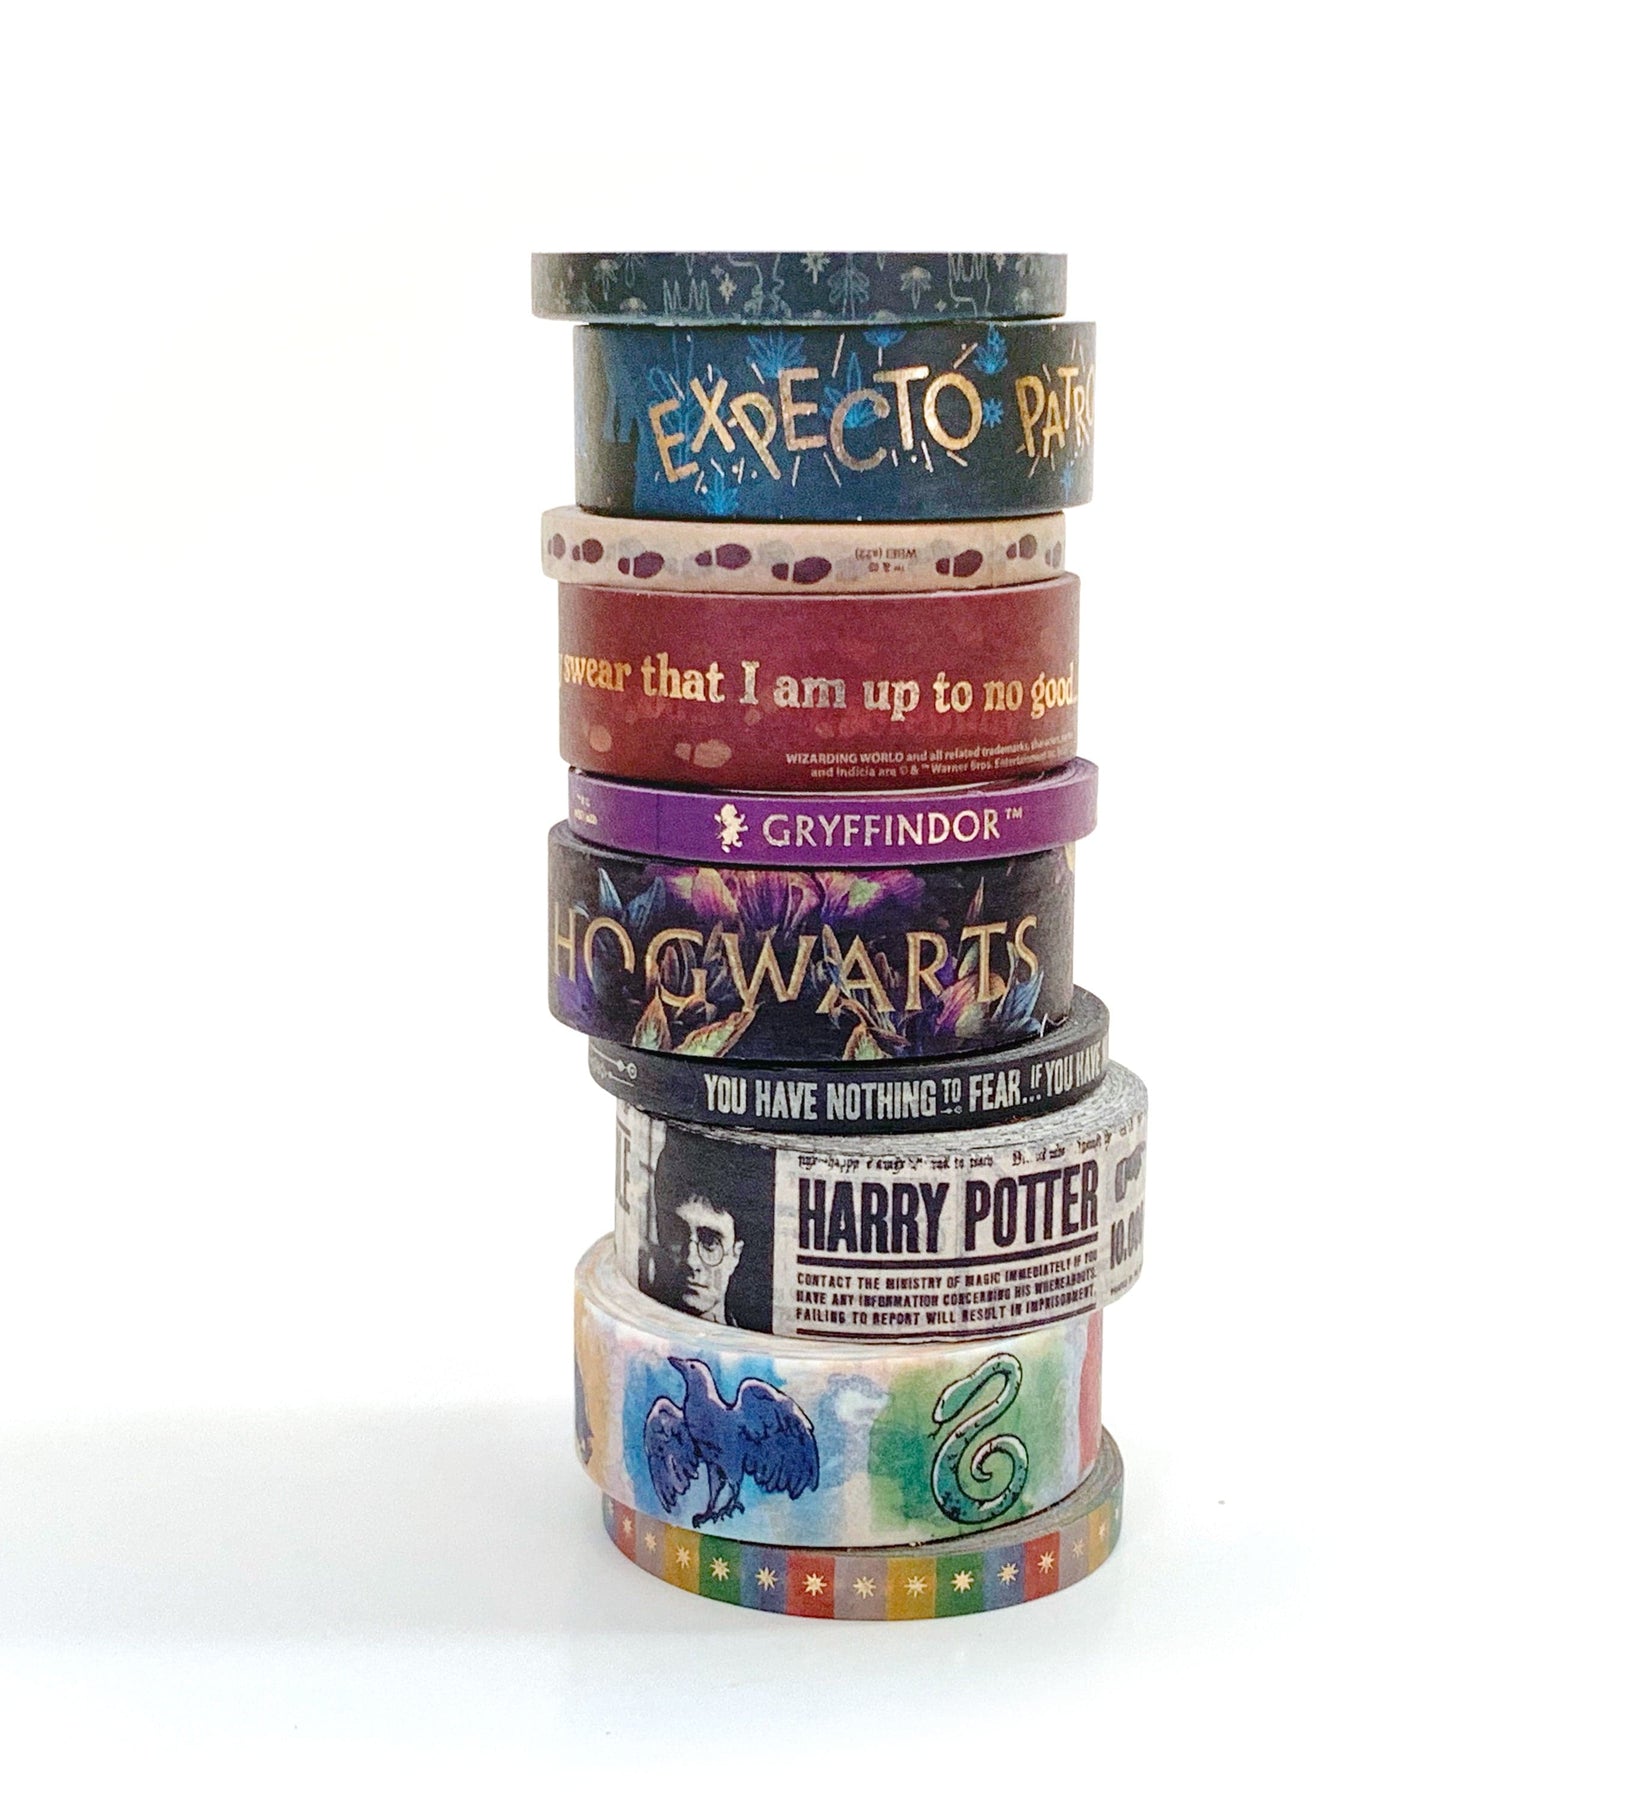 Paper House Productions Harry Potter Quidditch Match Set of 2 Foil Accent  Washi Tape Rolls for Scrapbooking and Crafts